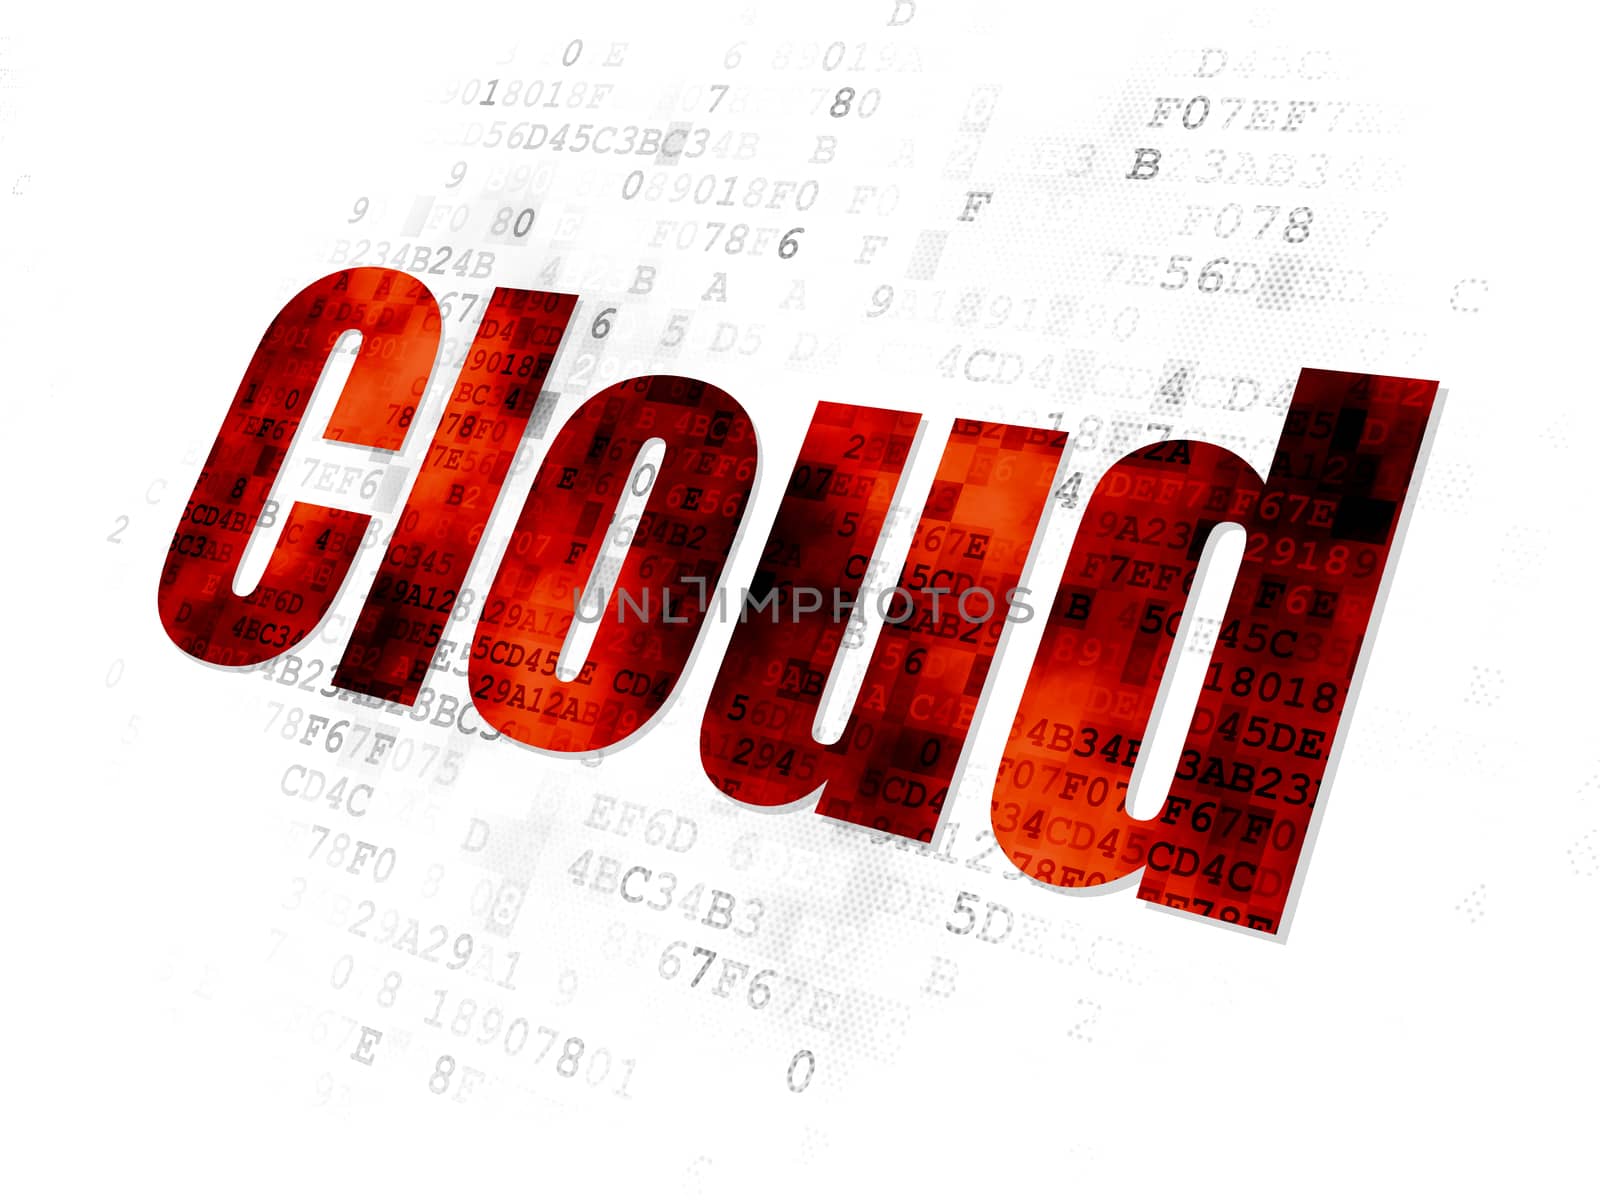 Cloud computing concept: Pixelated red text Cloud on Digital background